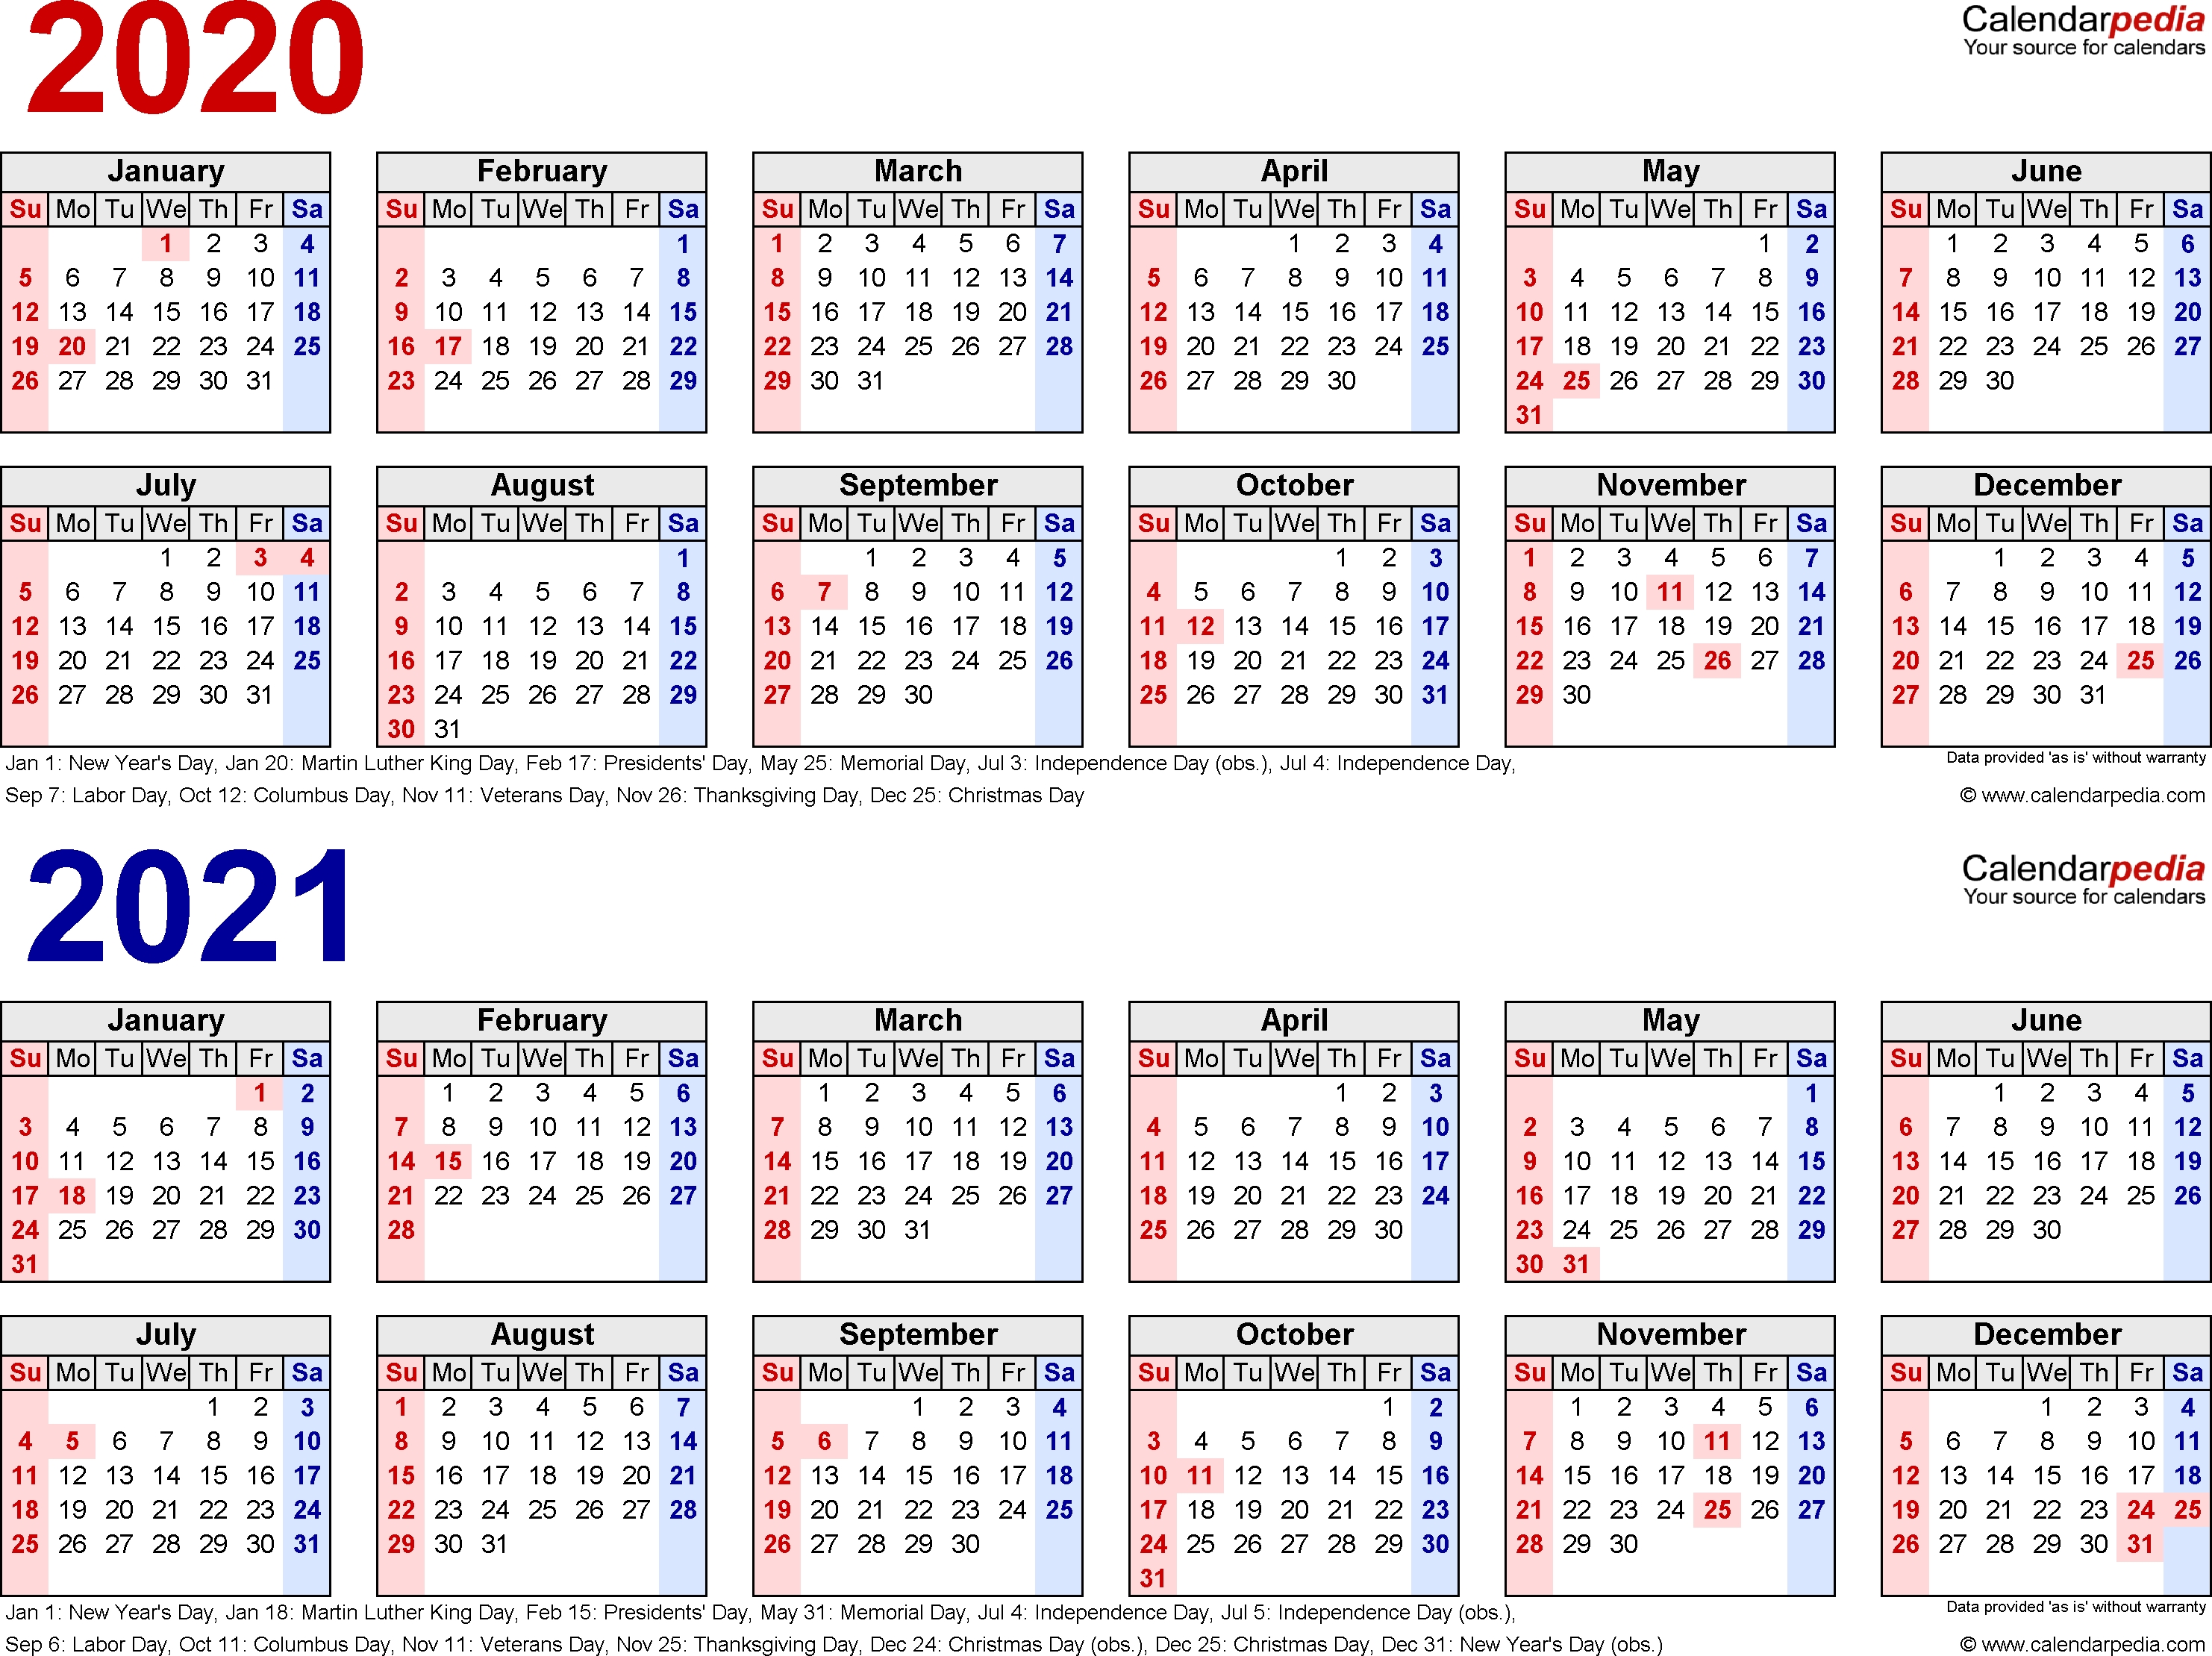 2020-2021 Two Year Calendar - Free Printable Excel Templates